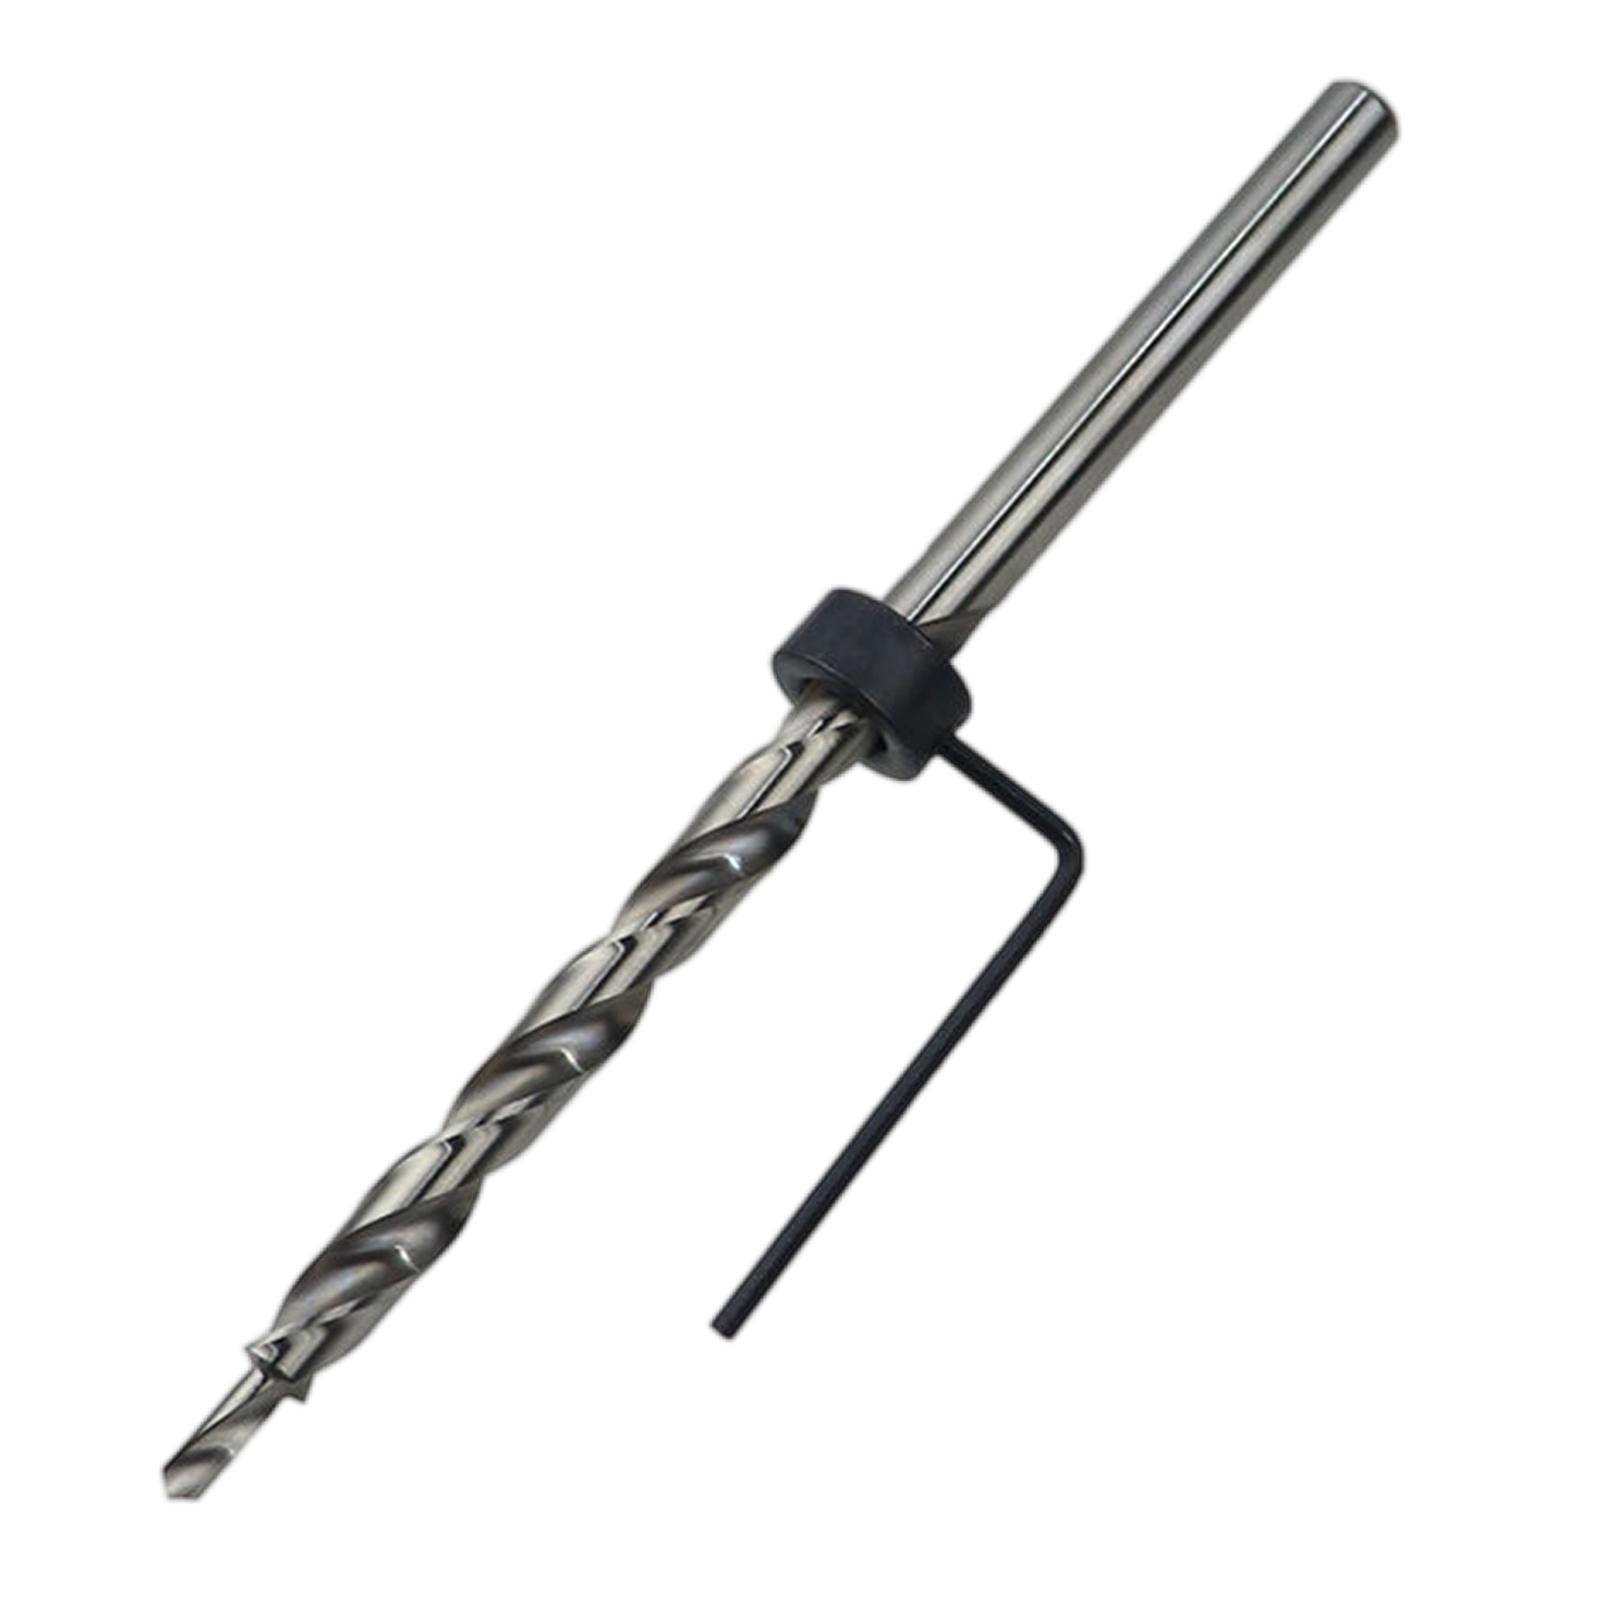 HSS Twist Step Drill Bit Round Shank with Stop Collar for DIY Power Tools 9.5mm